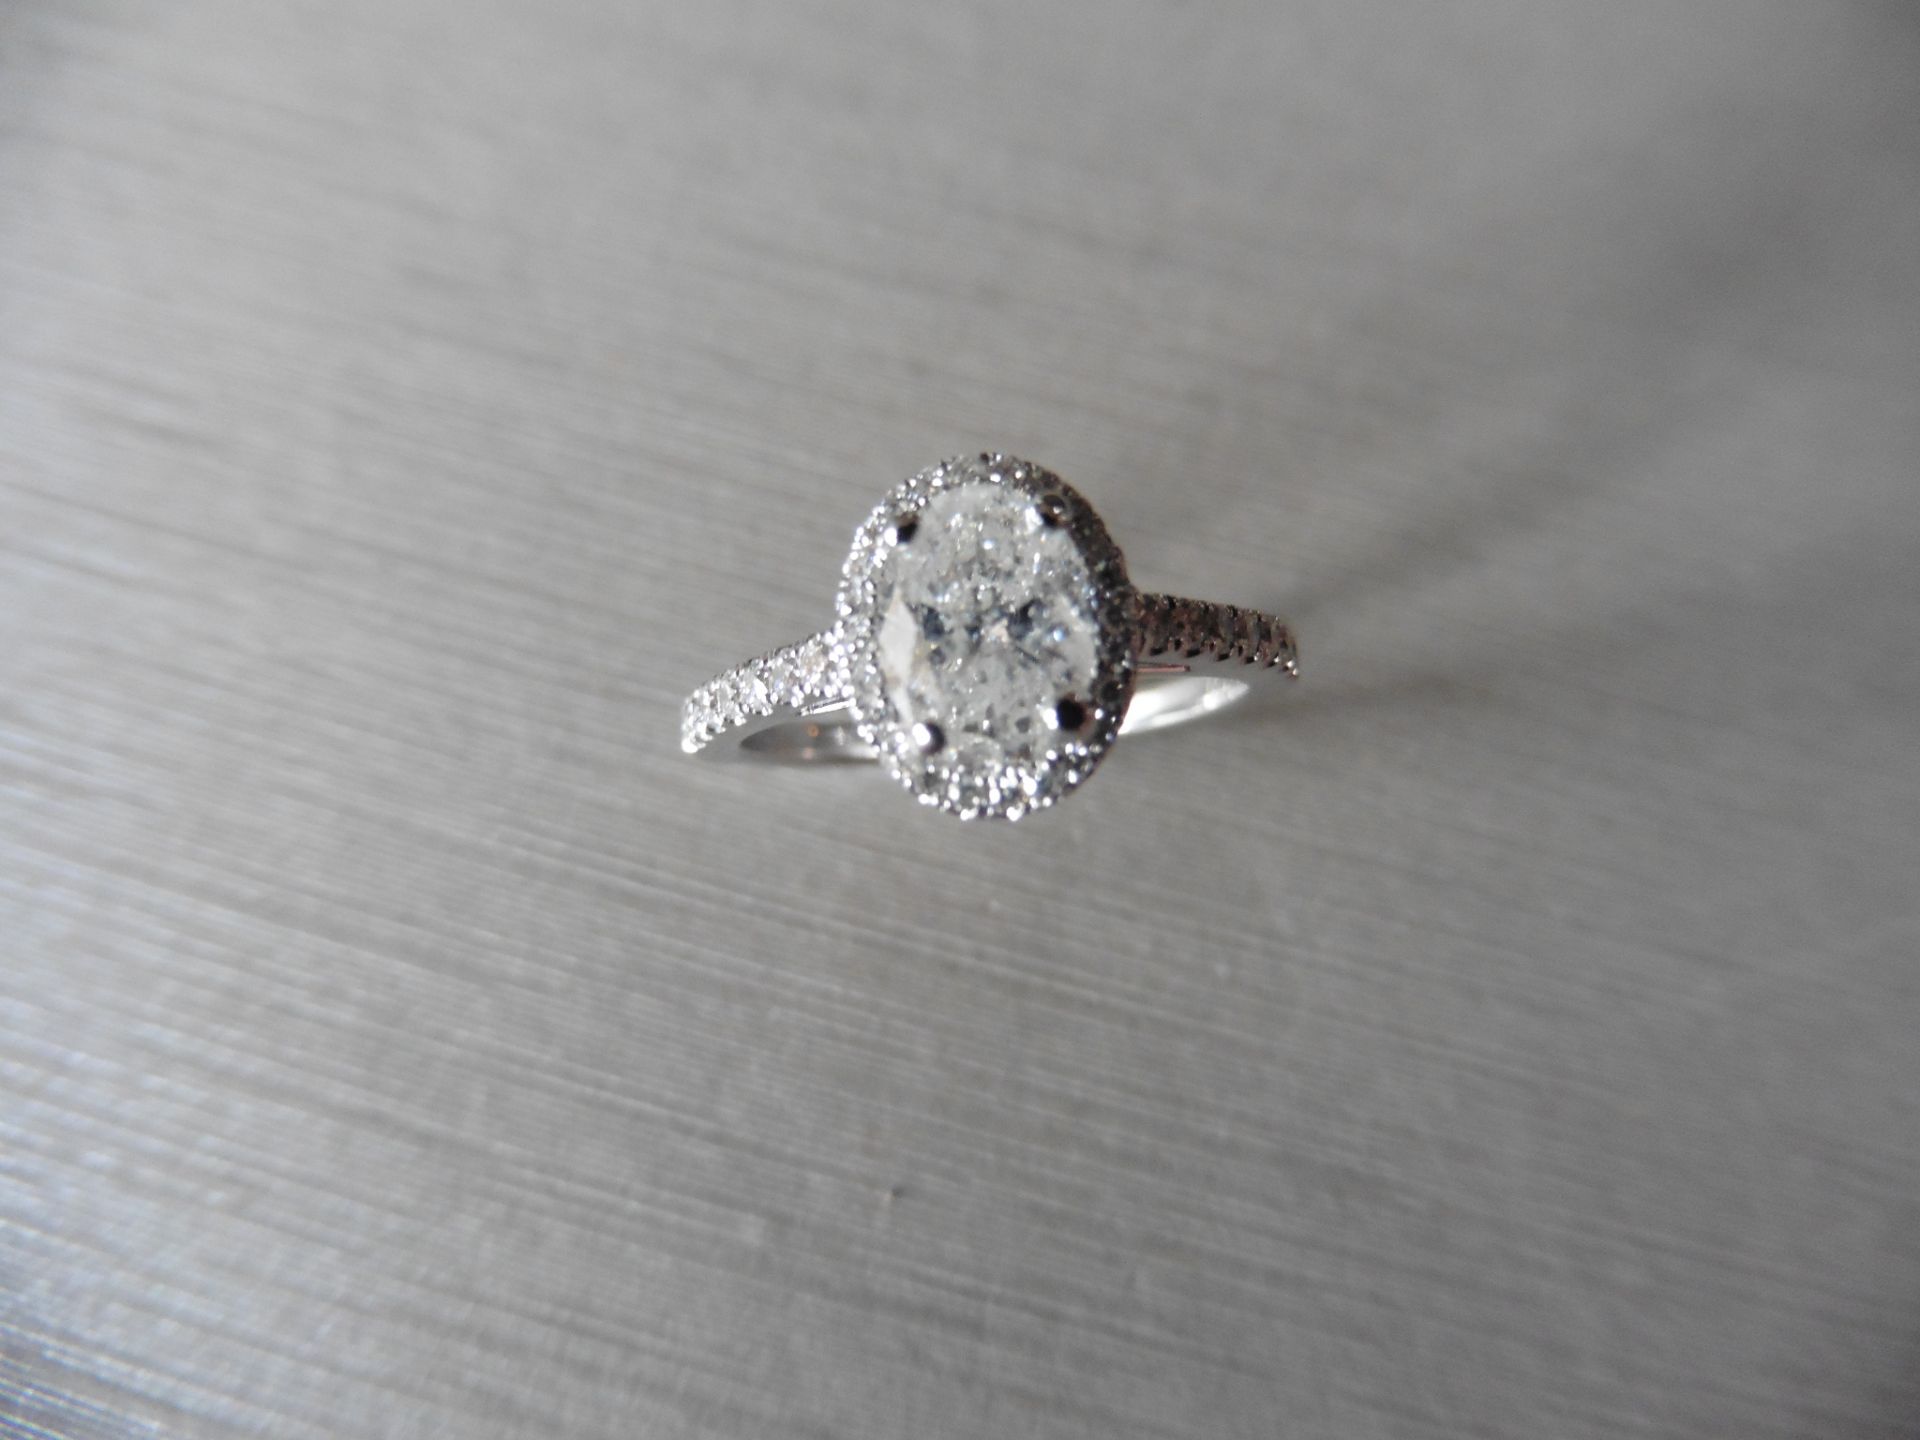 0.84ct oval diamond set solitaire ring. Centre diamond G/H colour, Si3 clarity. Halo setting of - Image 4 of 5